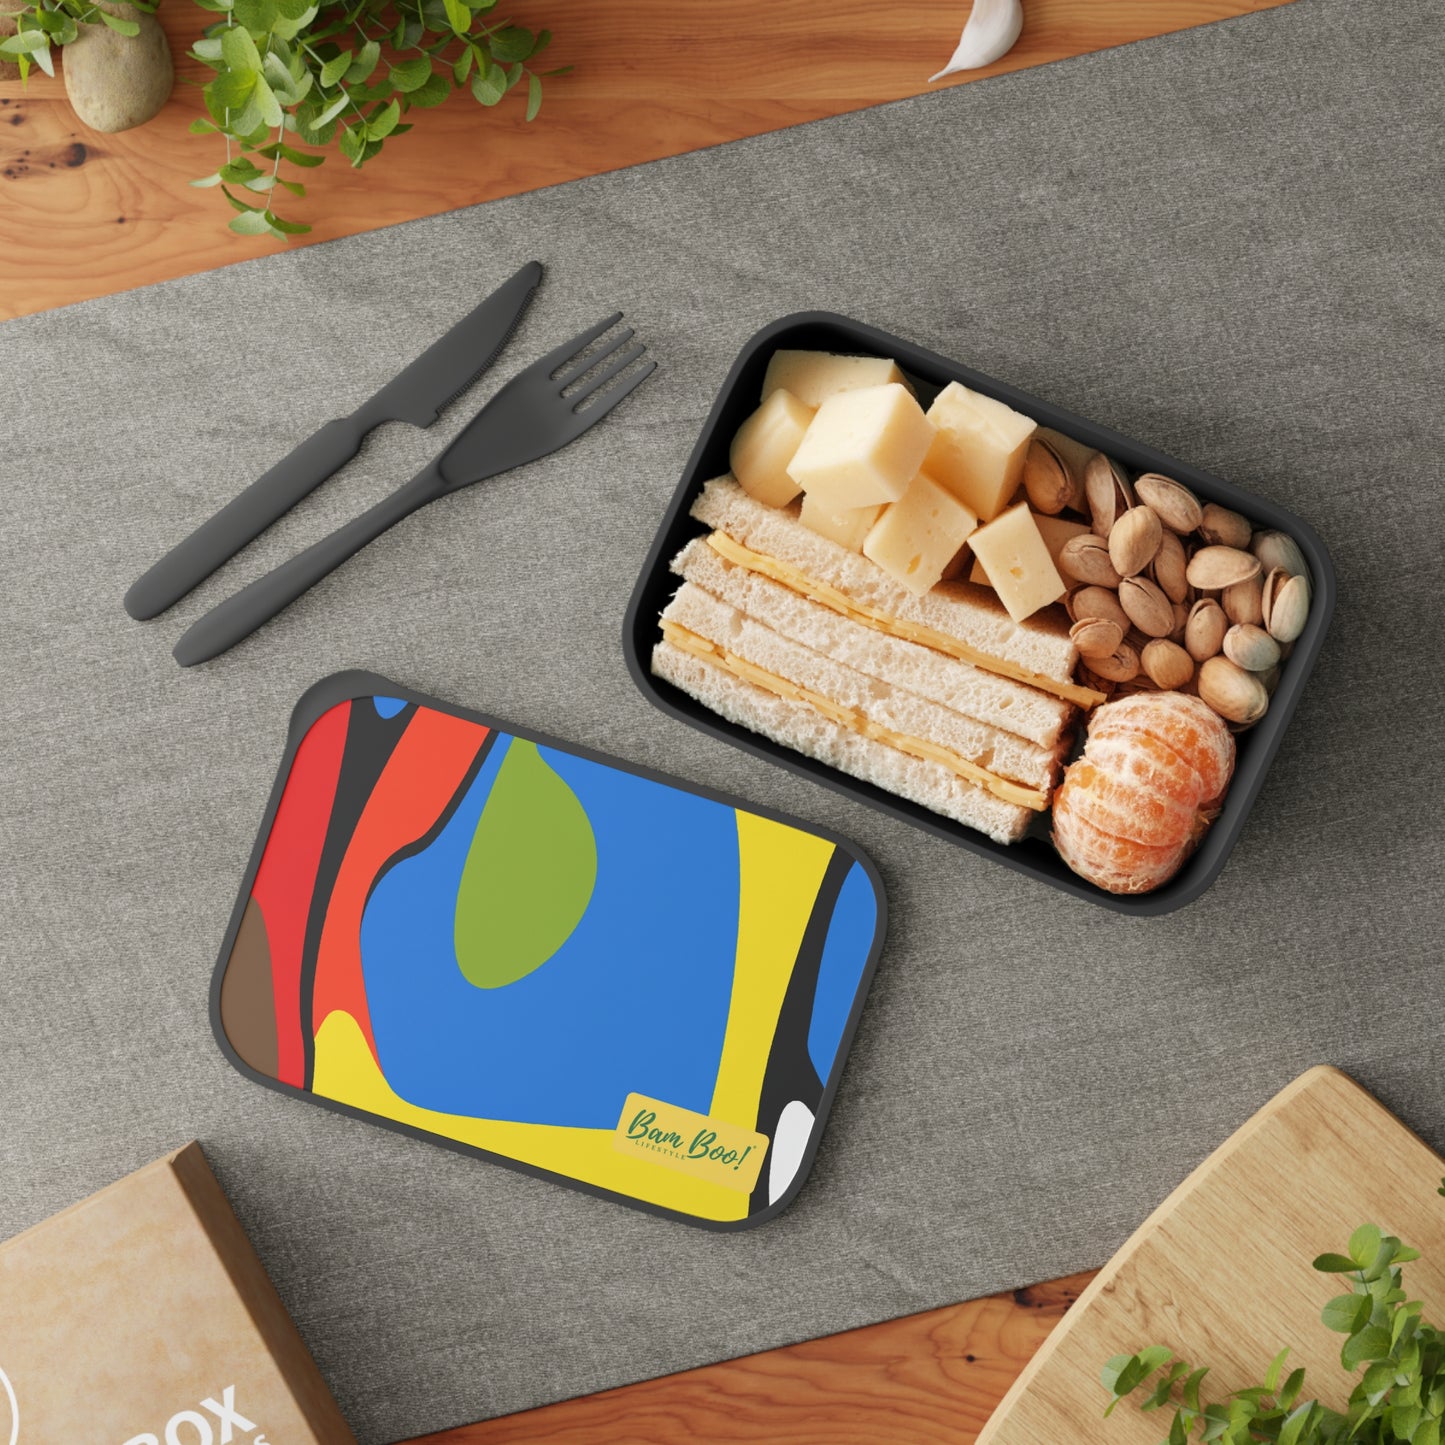 "Mosaic of Self-Expression" - Bam Boo! Lifestyle Eco-friendly PLA Bento Box with Band and Utensils